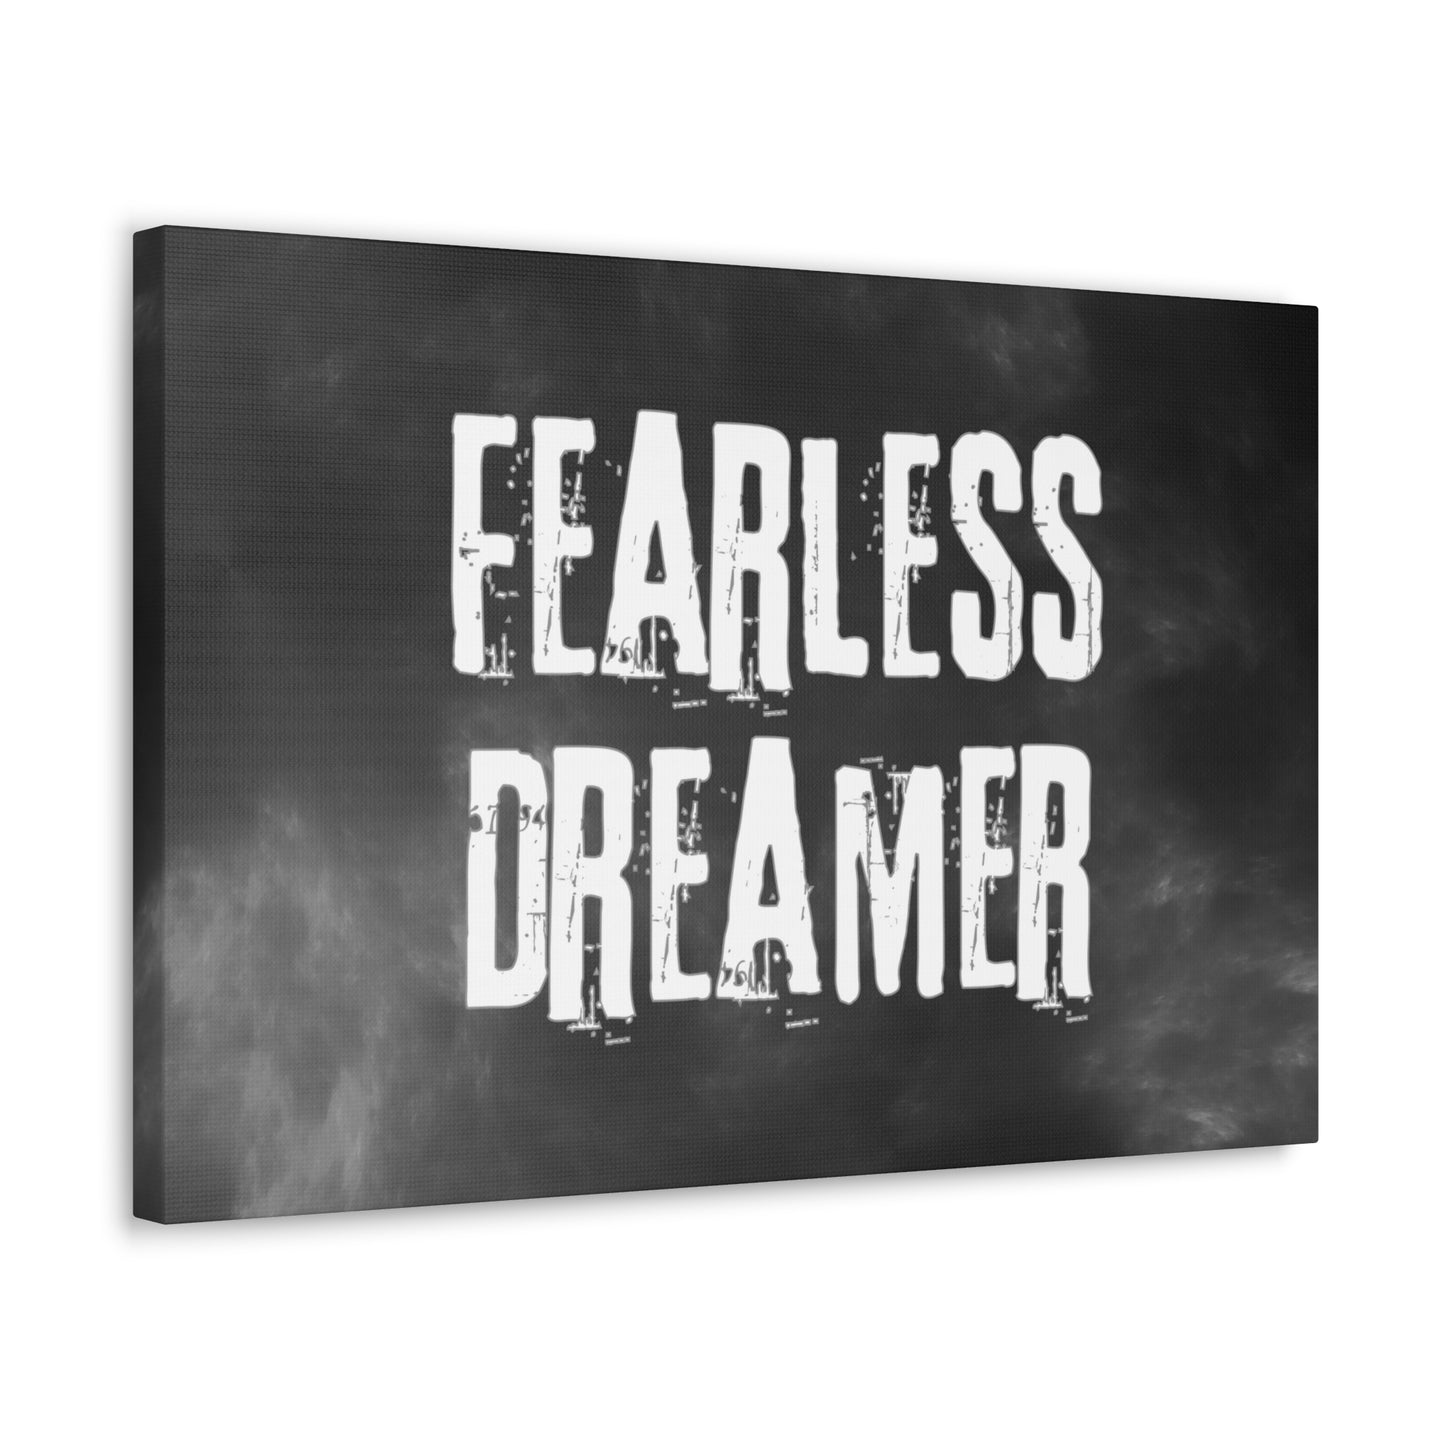 "Fearless Dreamer" Wall Art - Weave Got Gifts - Unique Gifts You Won’t Find Anywhere Else!